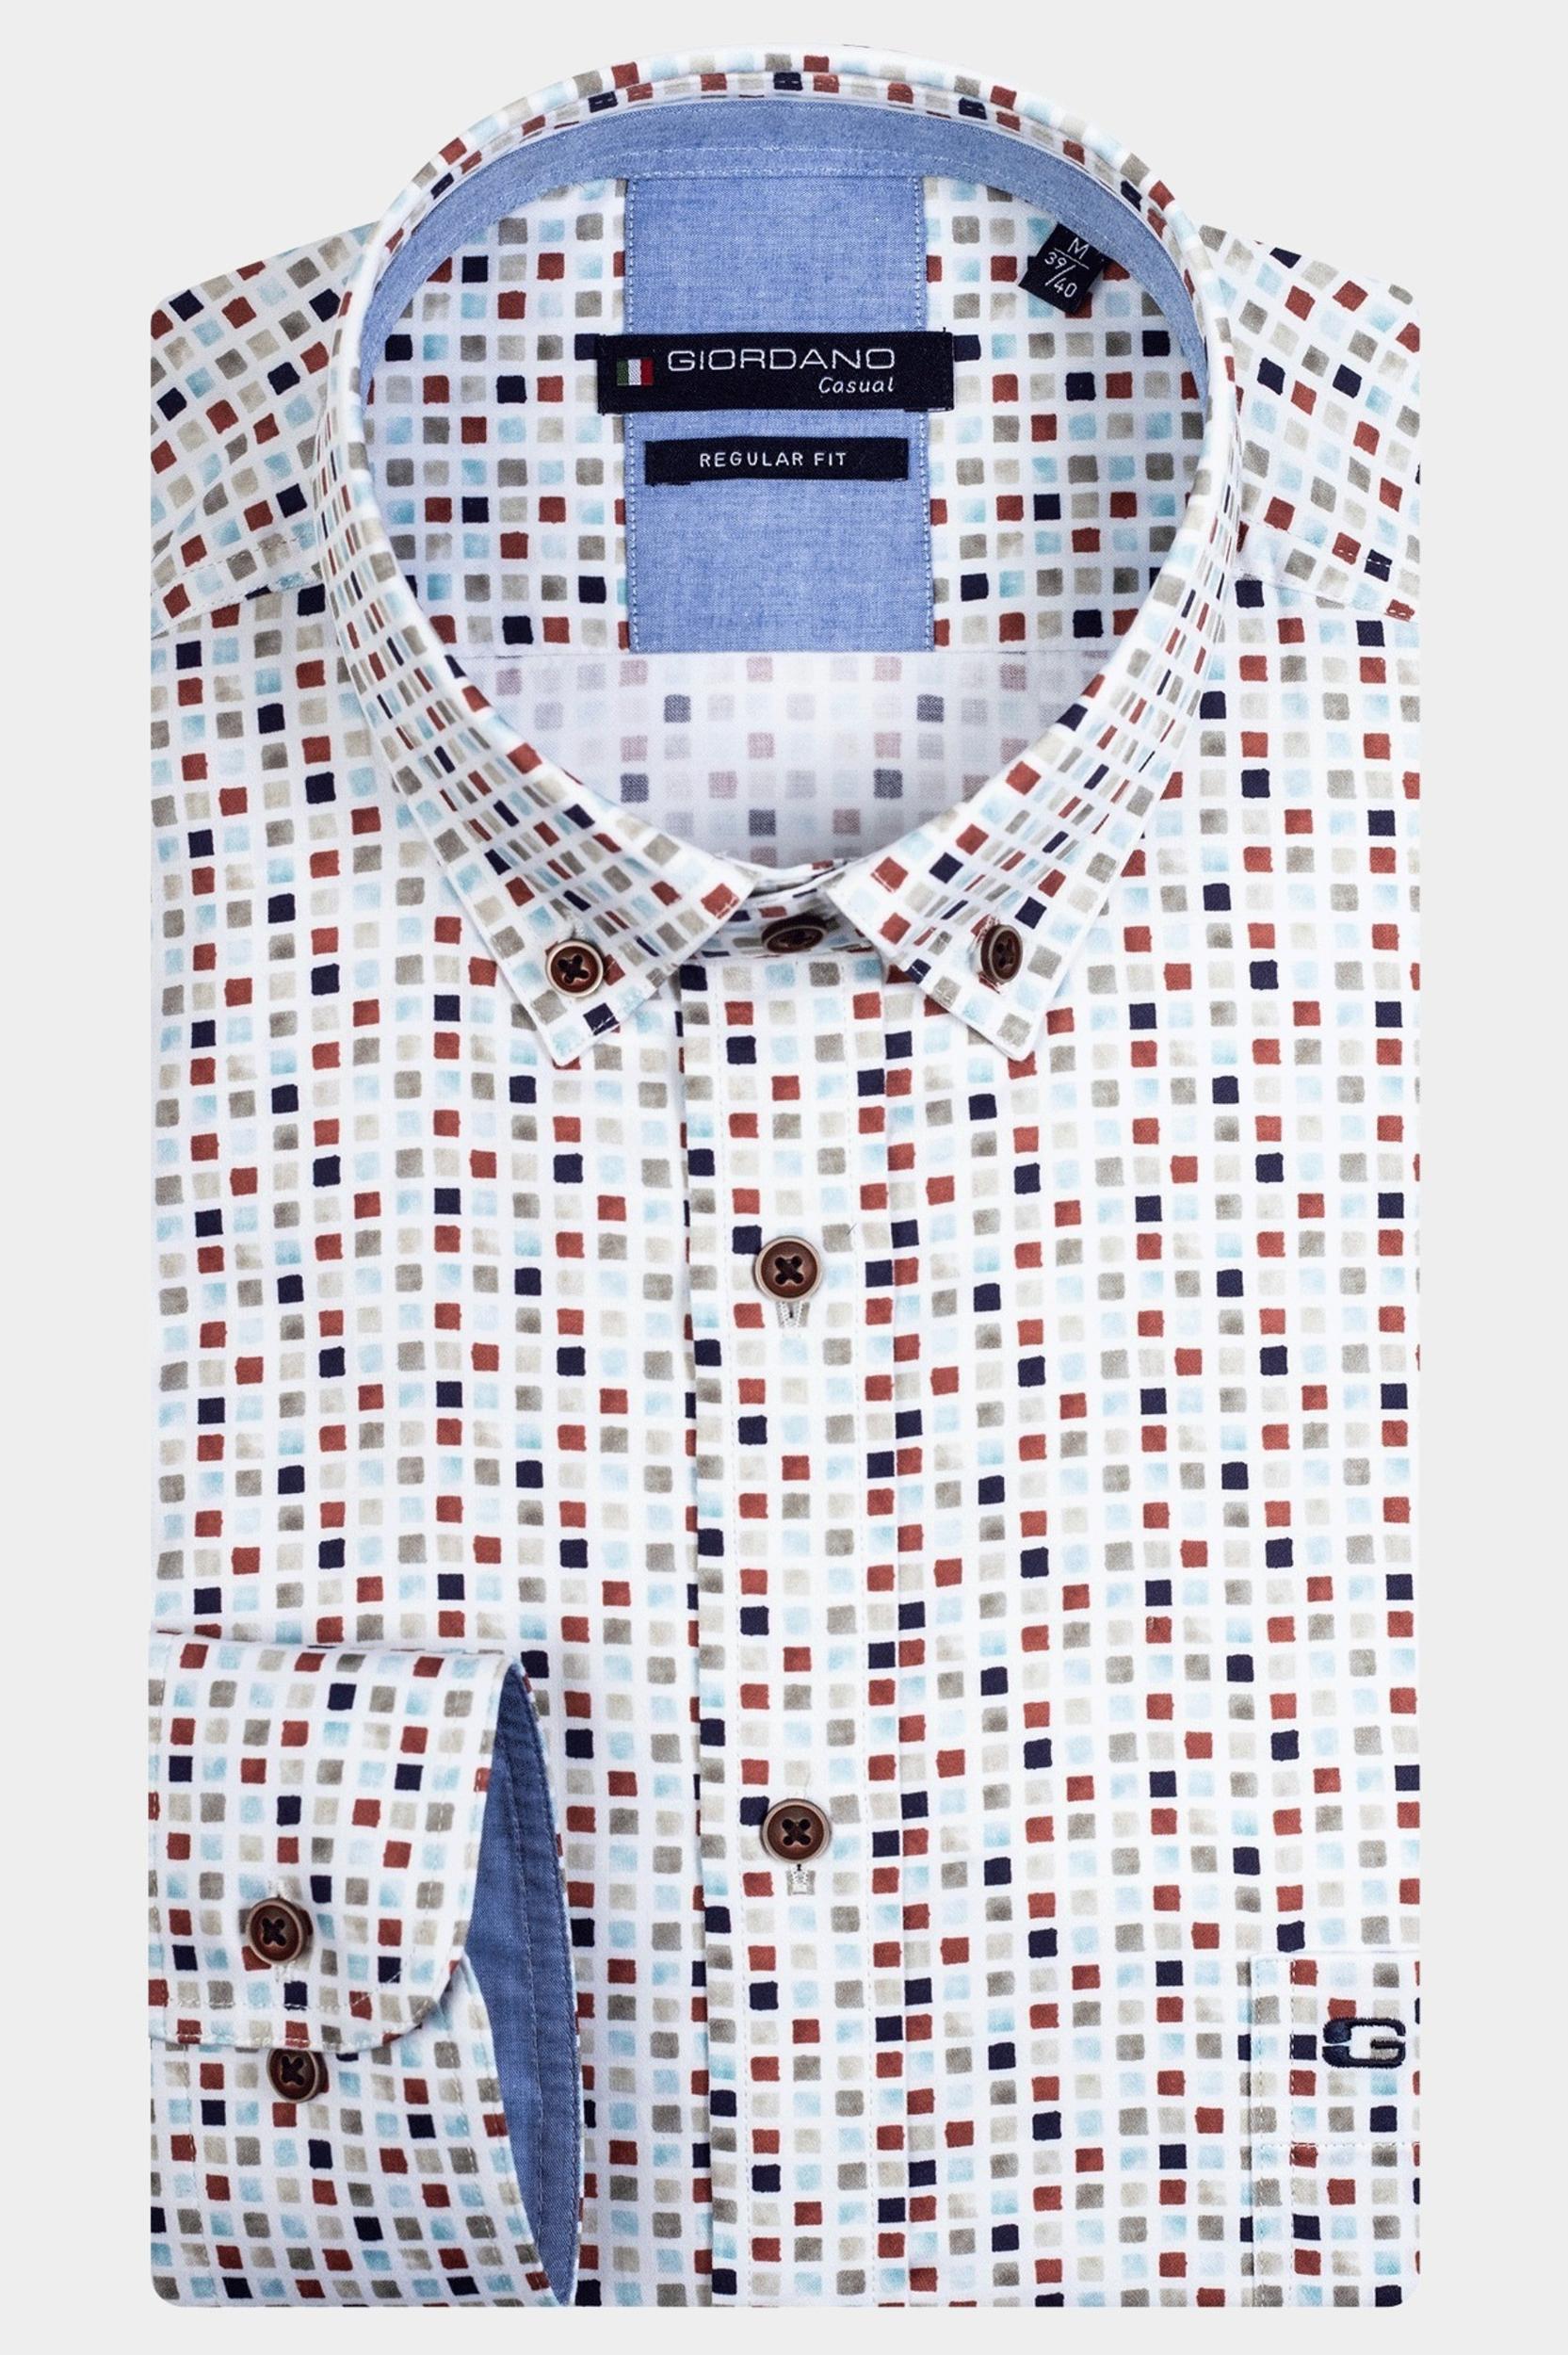 Giordano Casual hemd lange mouw Bruin Ivy Spaced Squares Print 417029/80